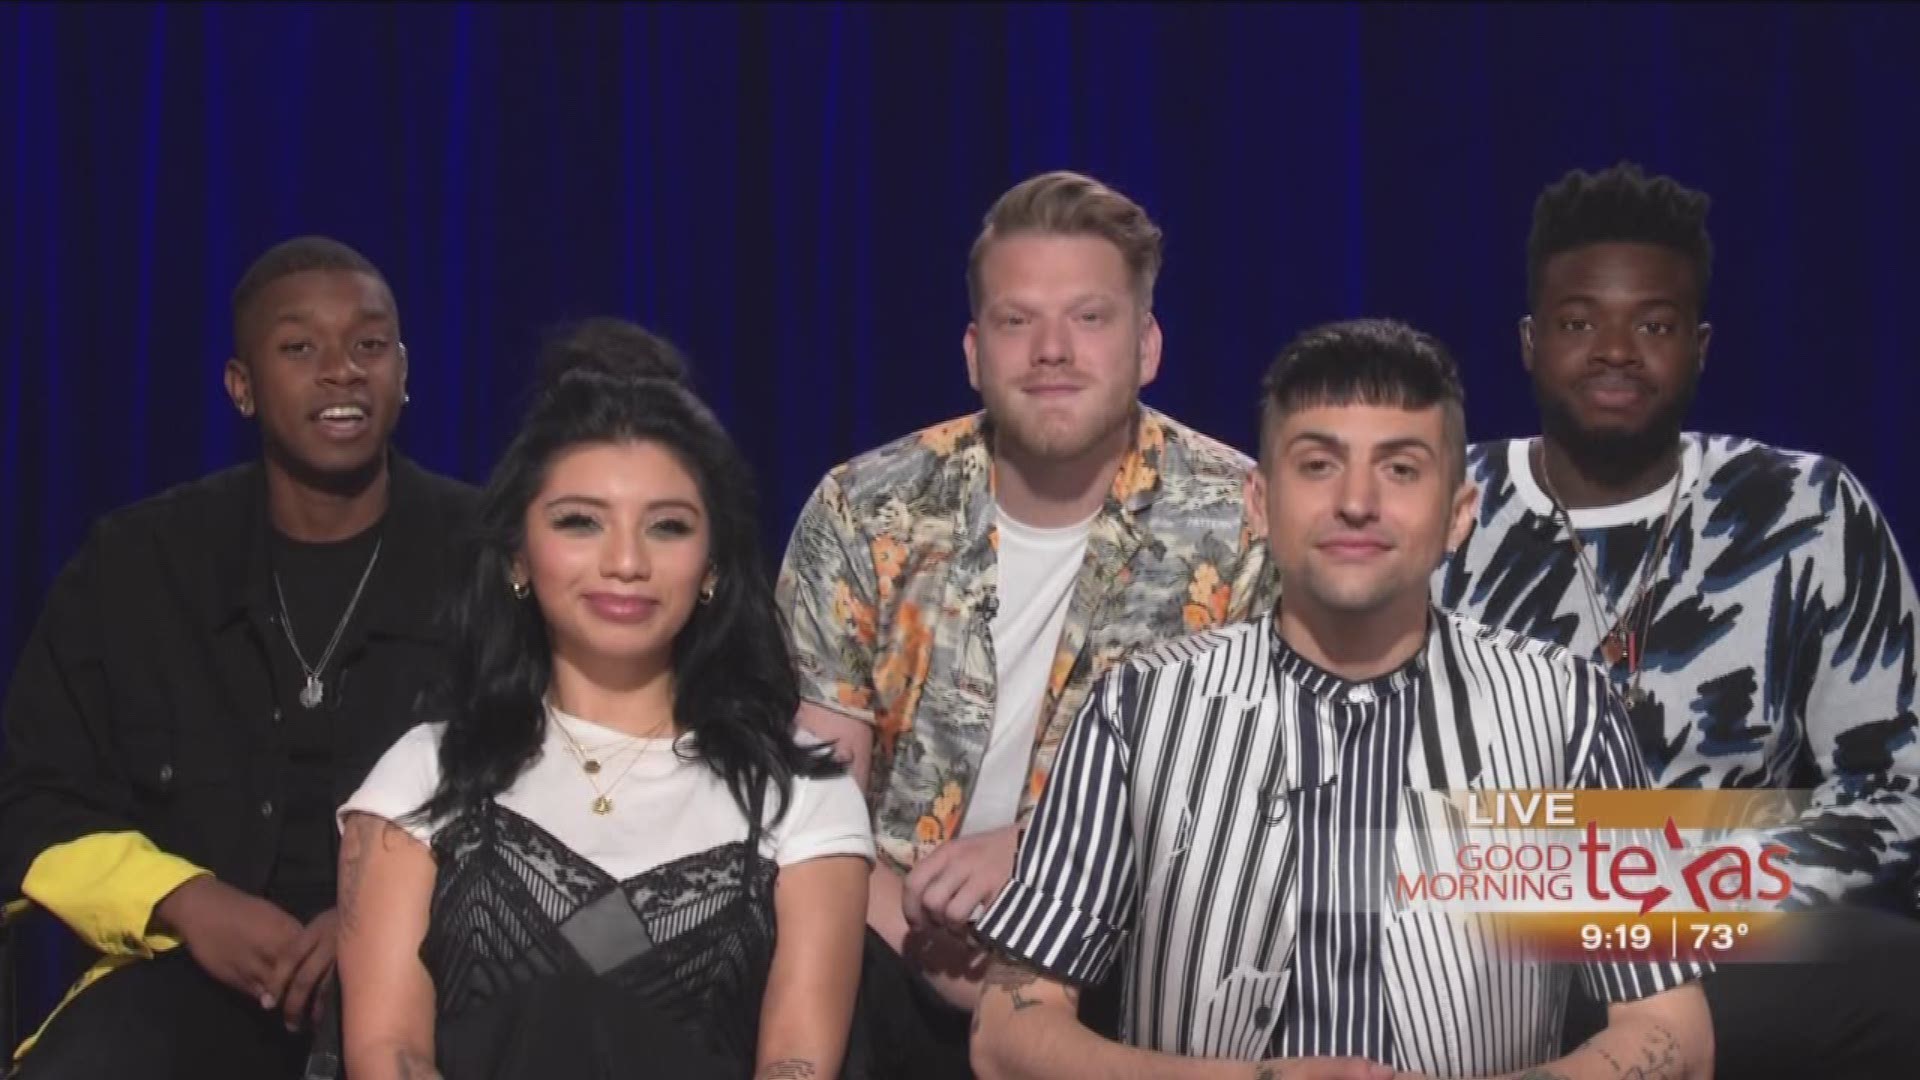 North Texas' own Acapella Pentatonix talk to us live about their new CD "Havana's" and upcoming concert.